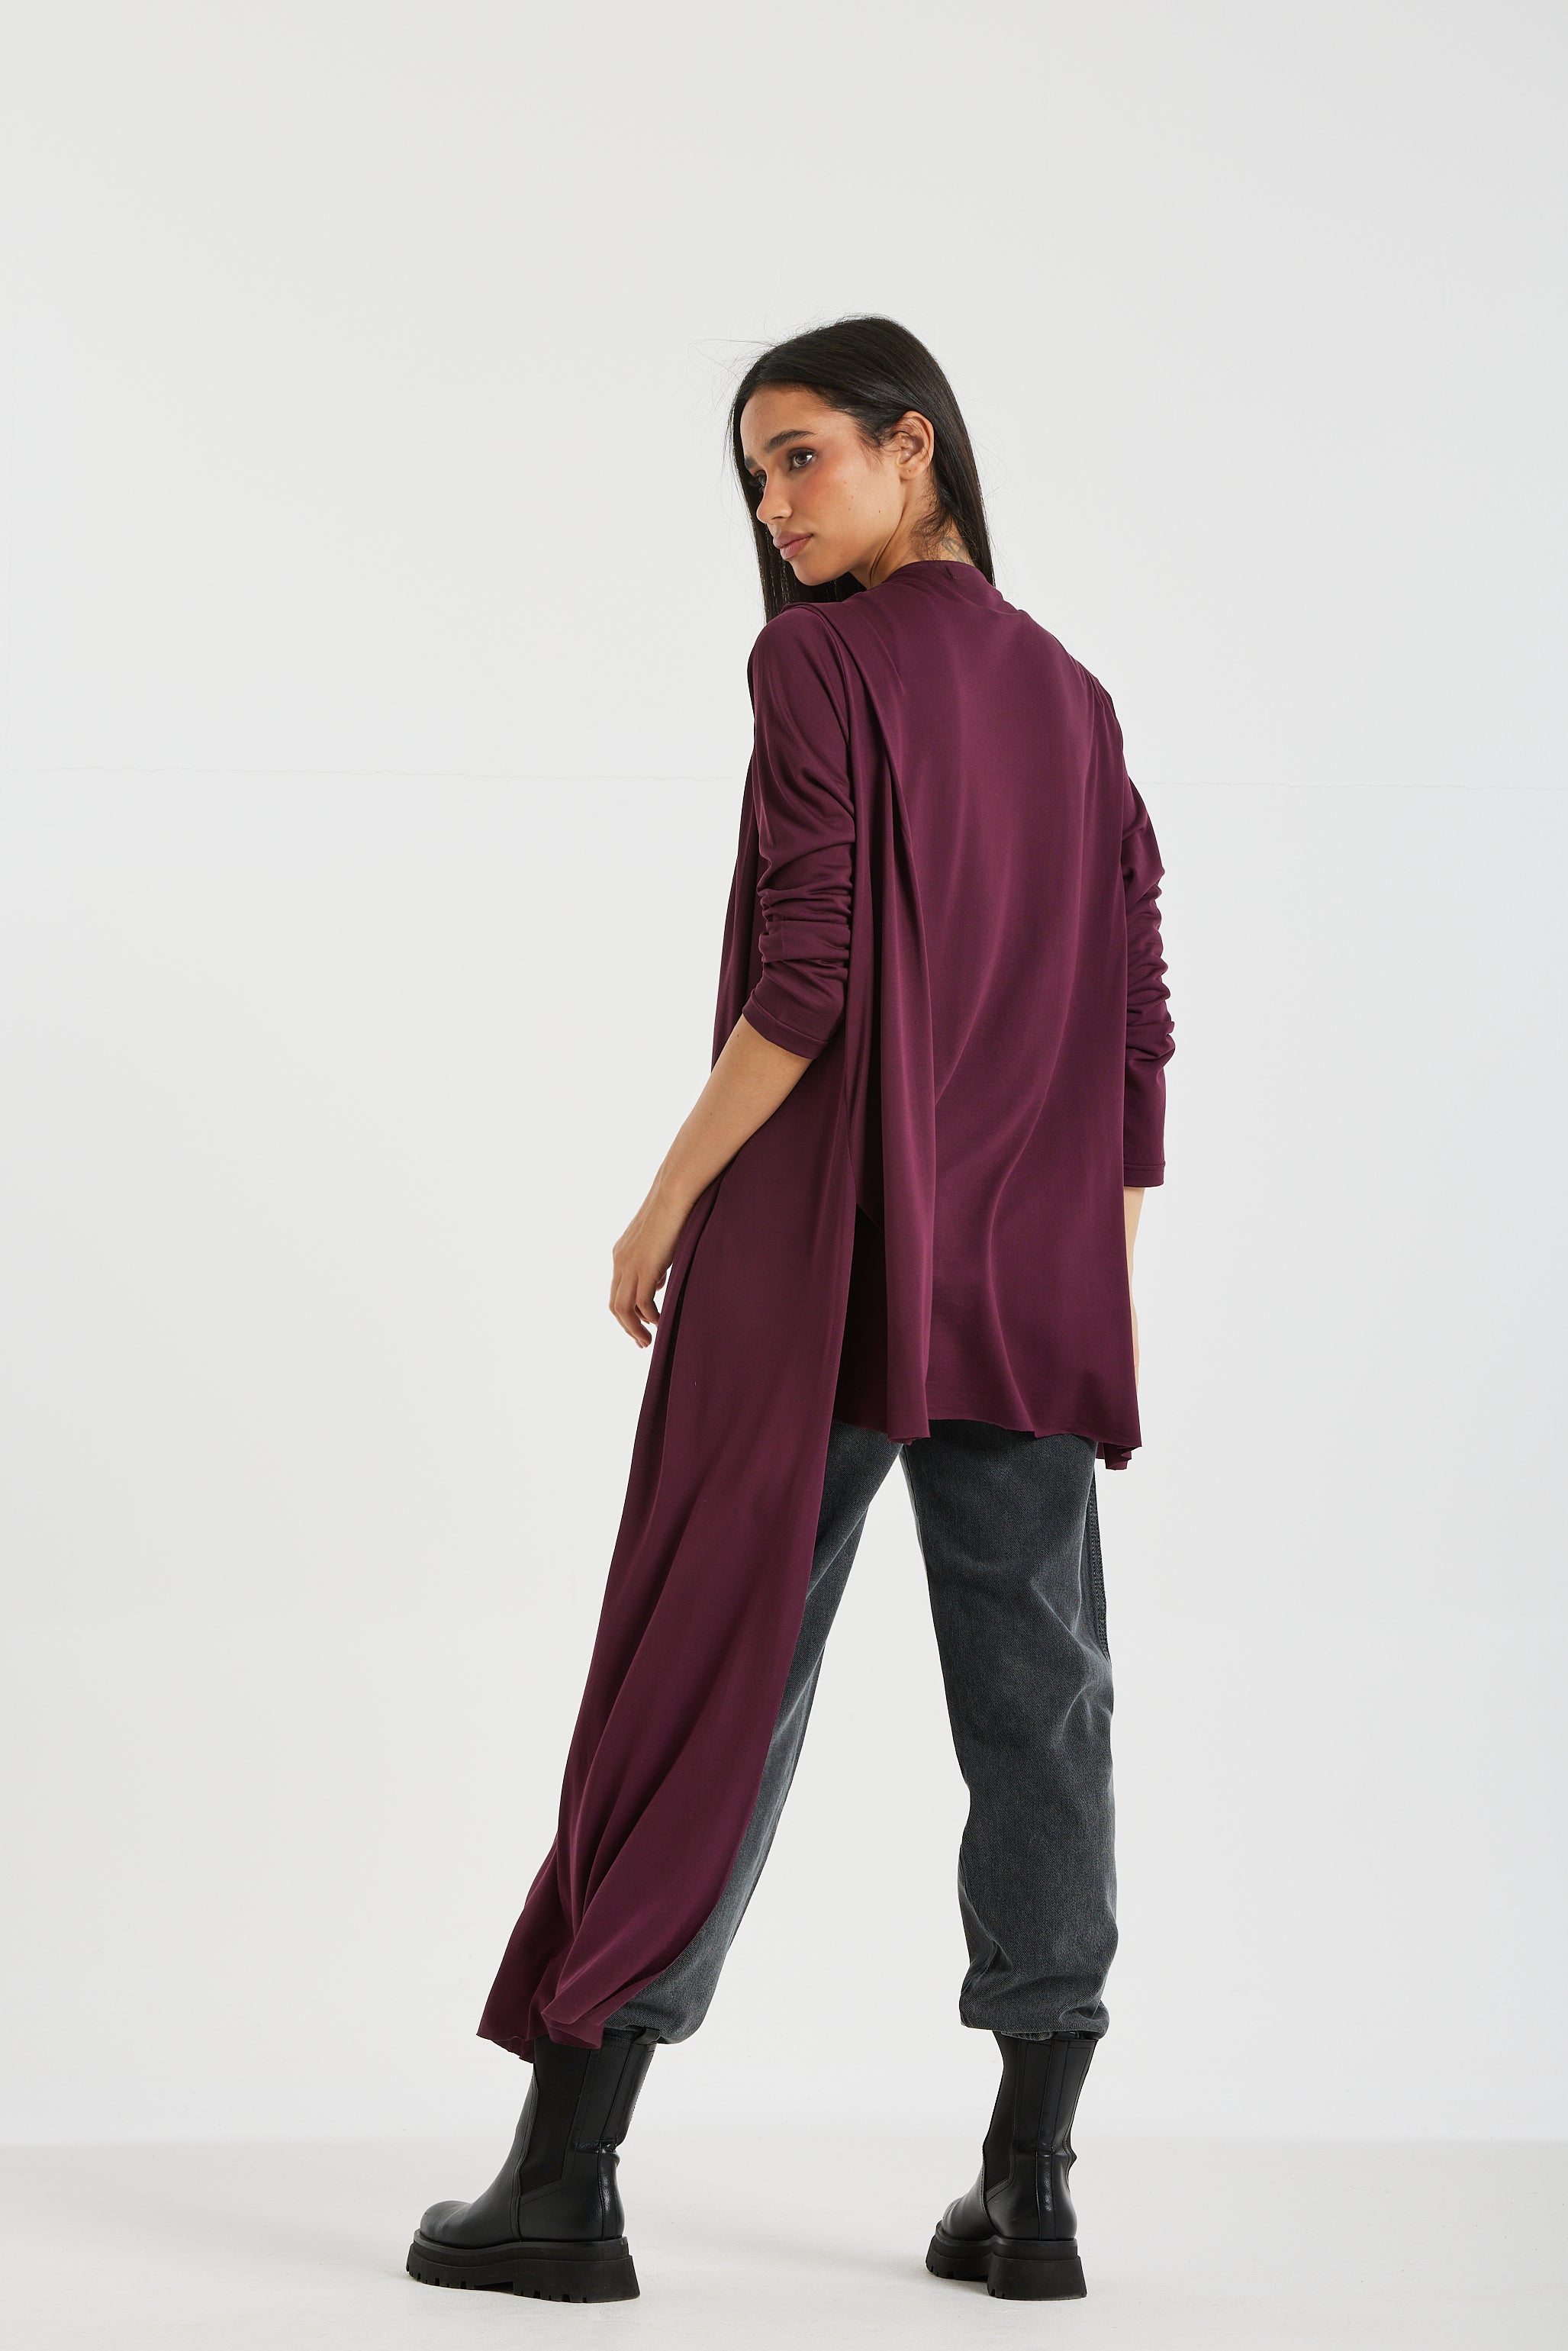 Maxi Side Draped Top in Burgundy